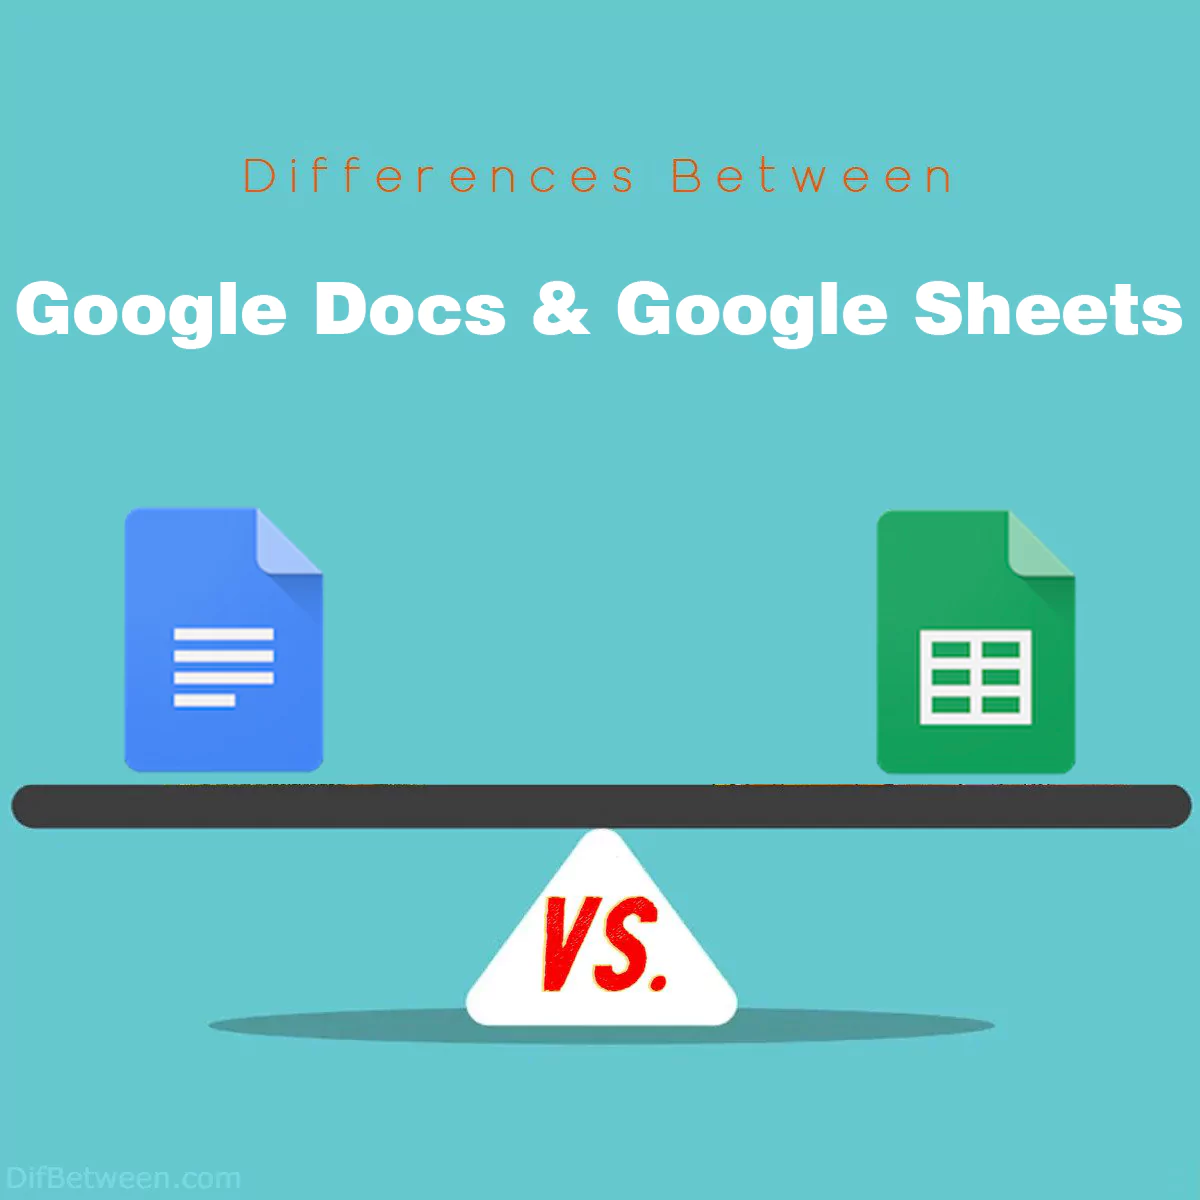 Differences Between Google Docs and Google Sheets